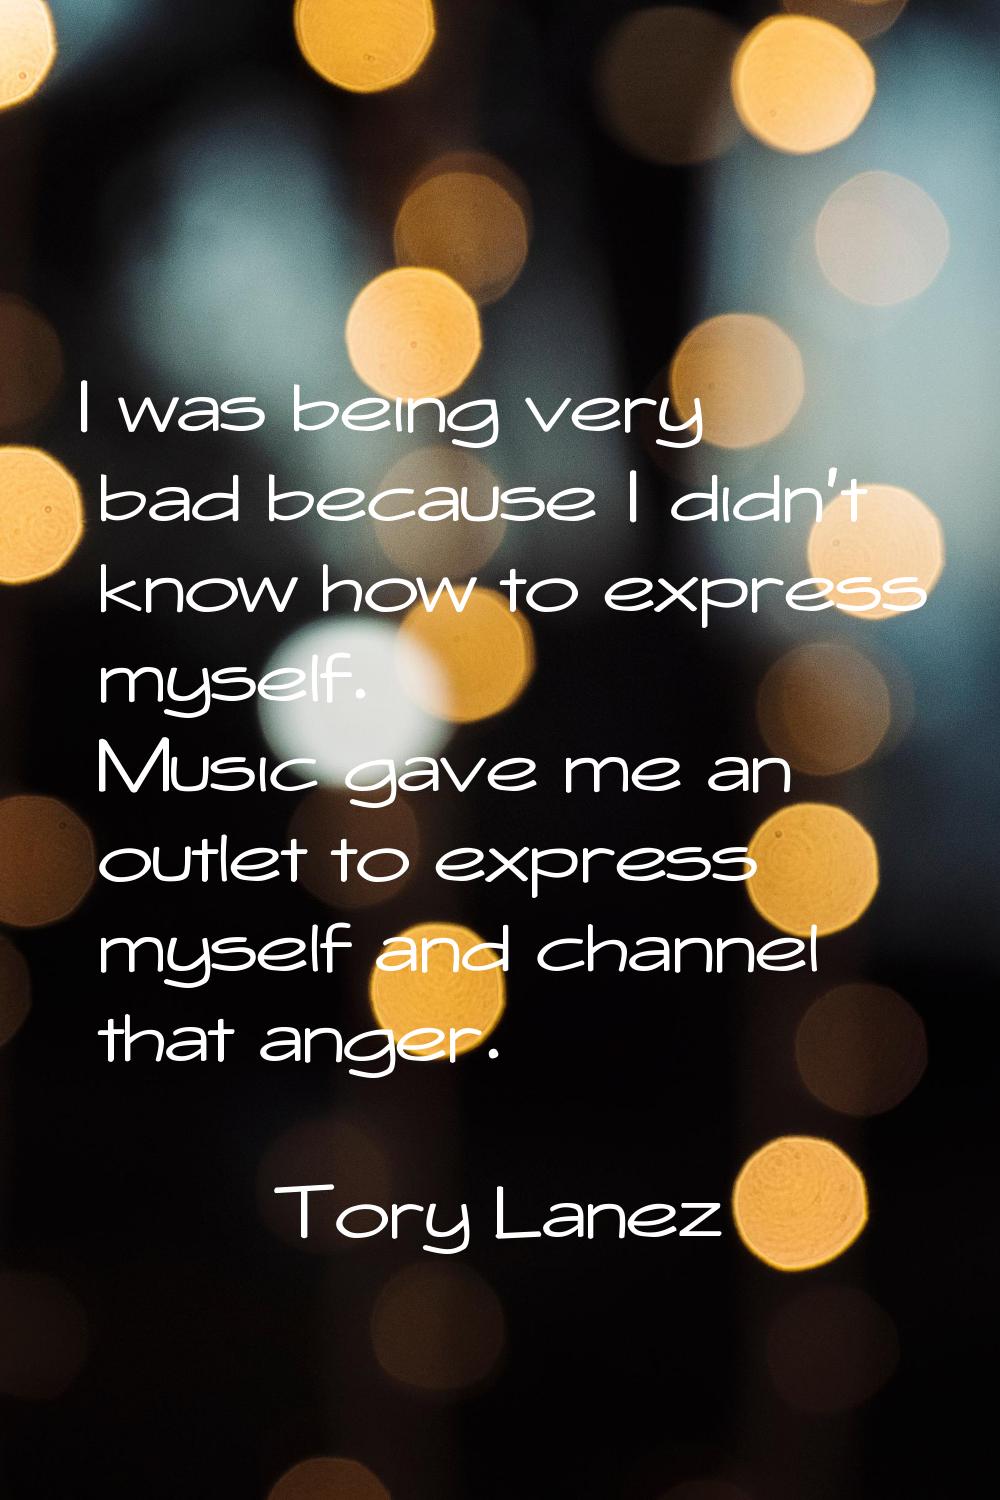 I was being very bad because I didn't know how to express myself. Music gave me an outlet to expres